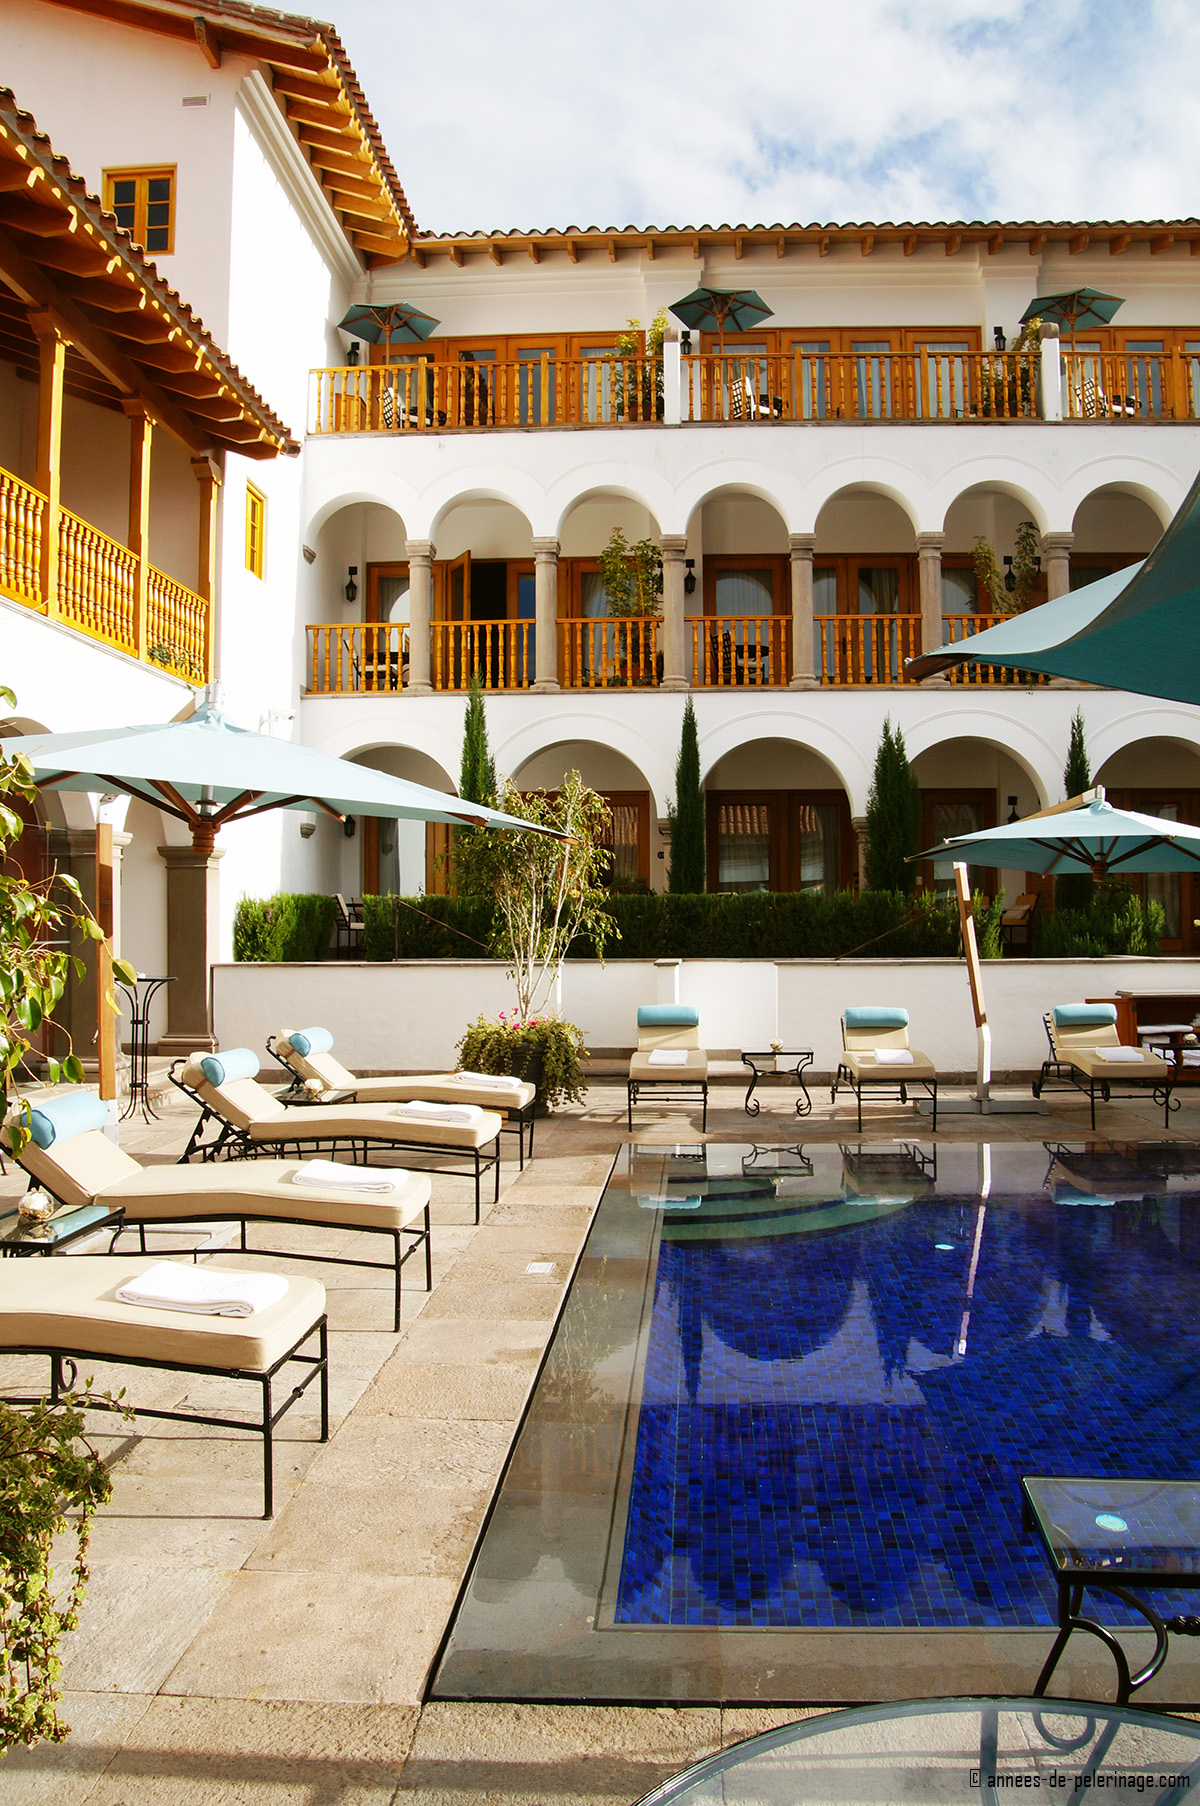 The 5 best luxury hotels in Peru explore South America in style